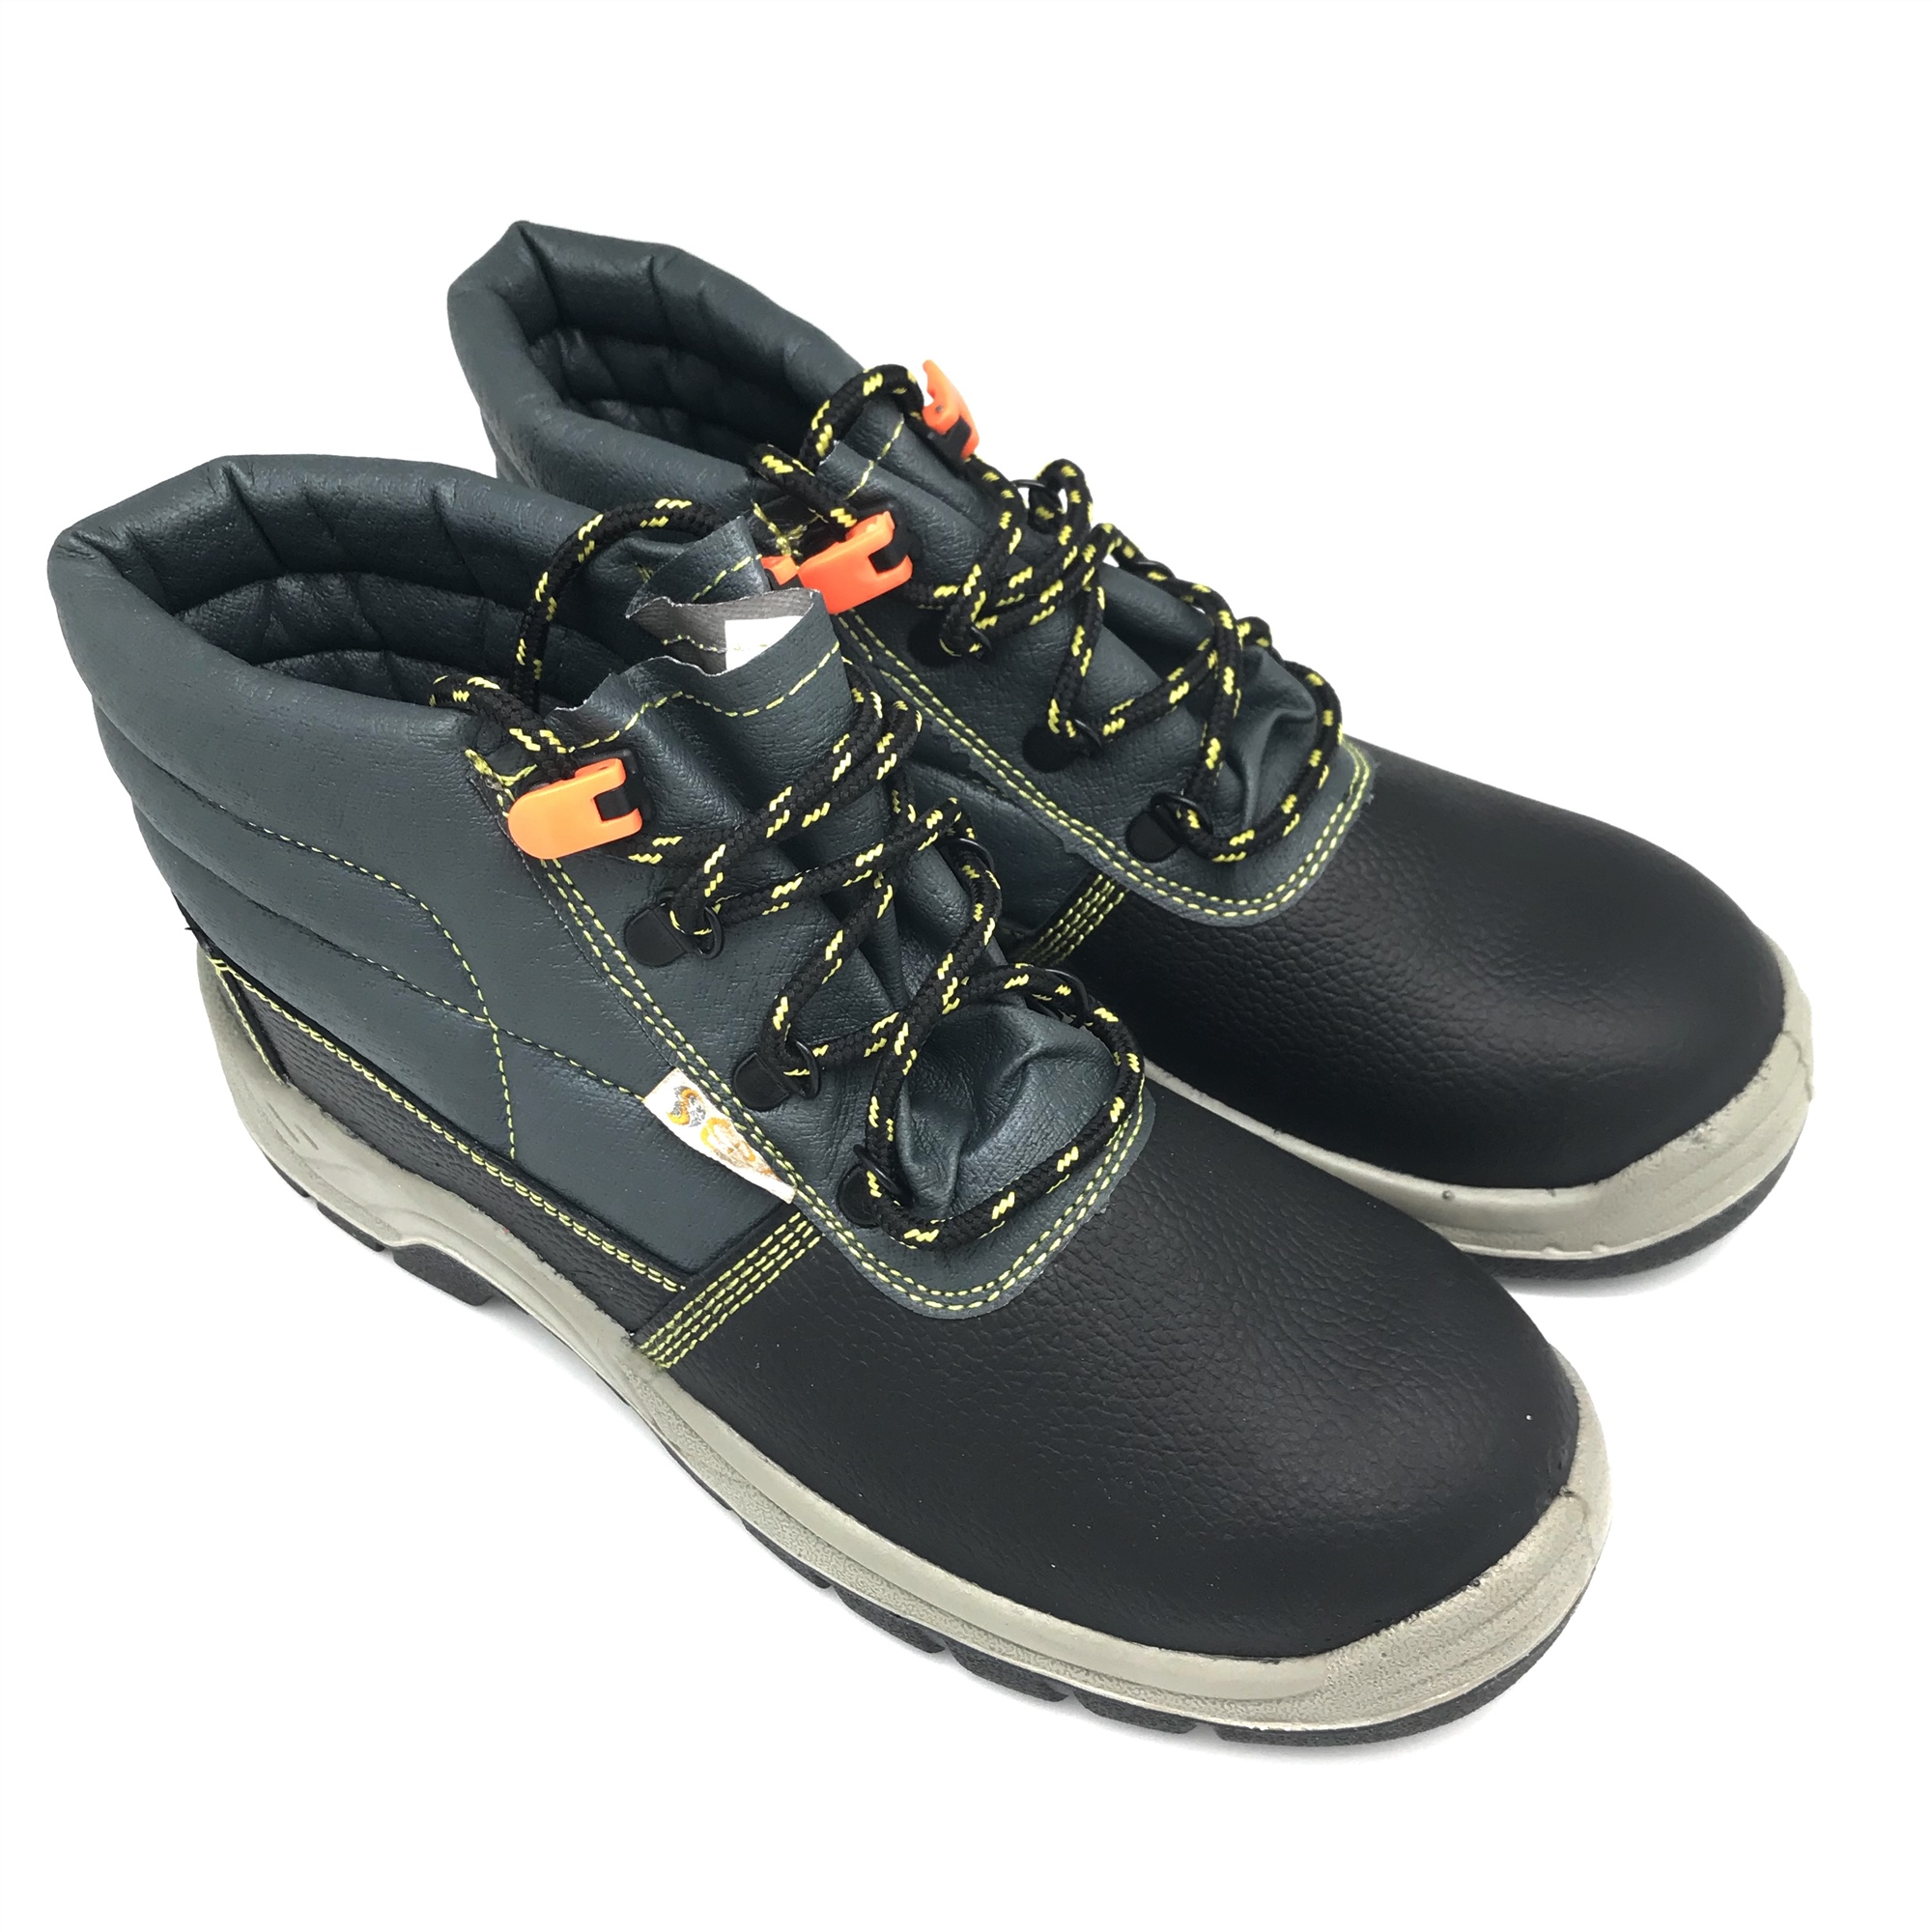 Black genuine leather safety shoes with CE ,Anti static construction waterproof safety shoes